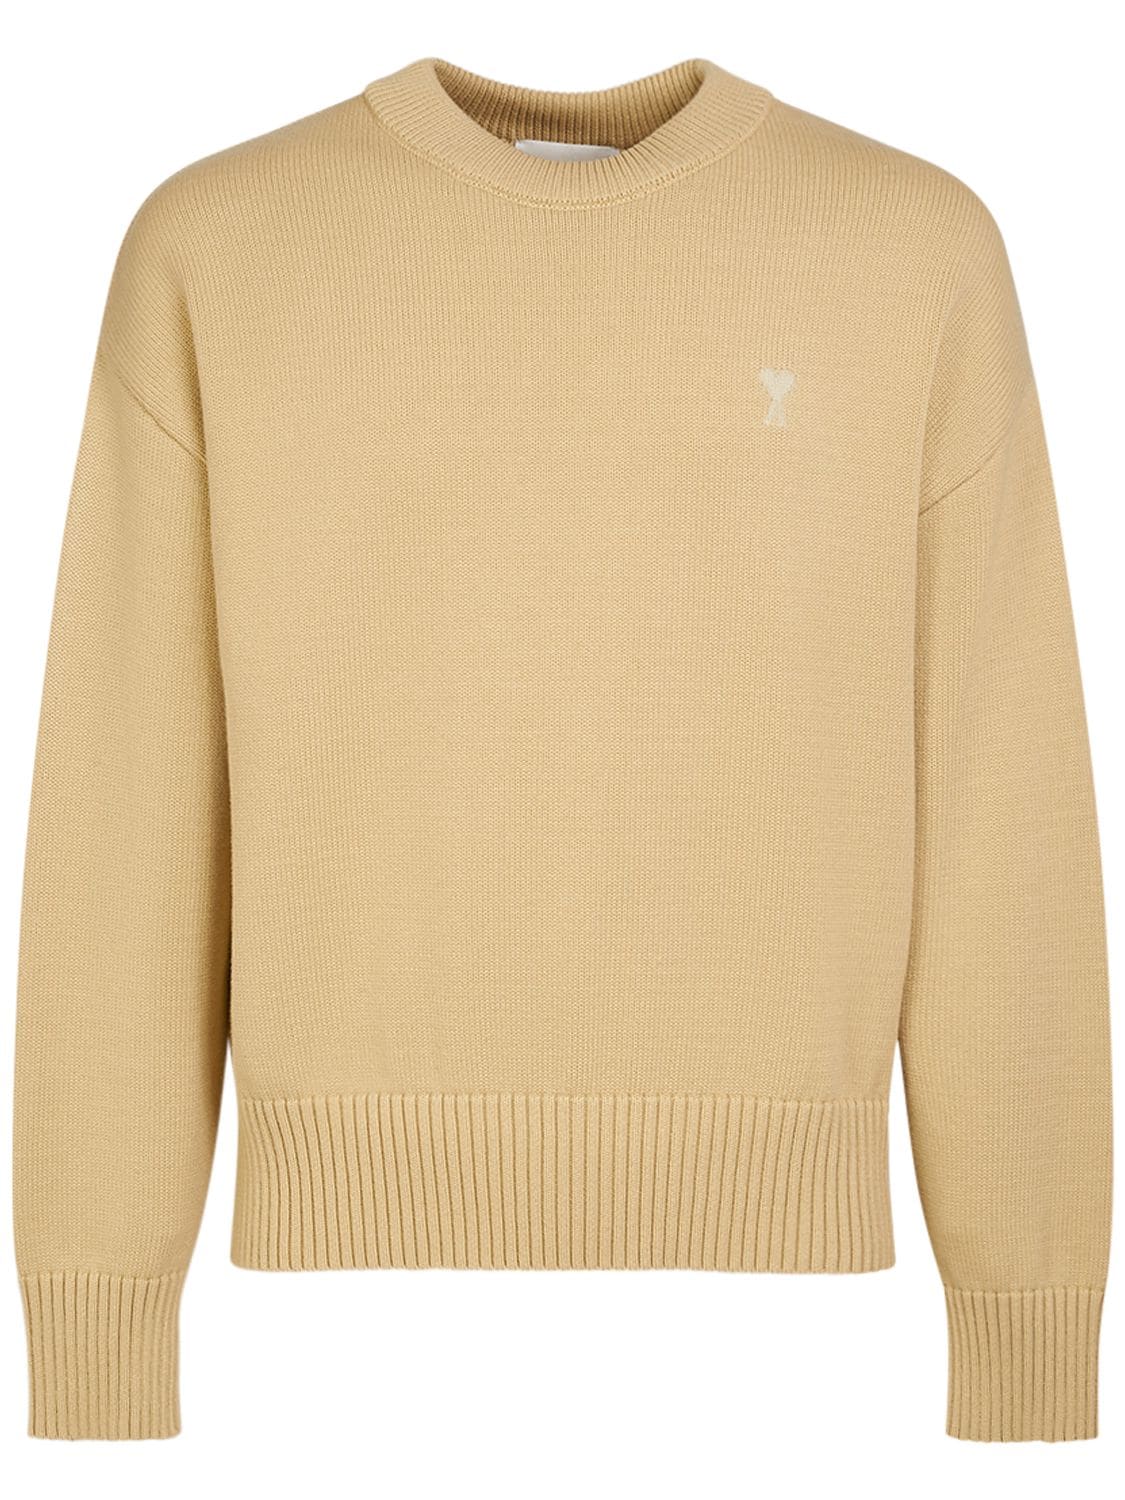 Image of Adc Cotton & Wool Crewneck Sweater